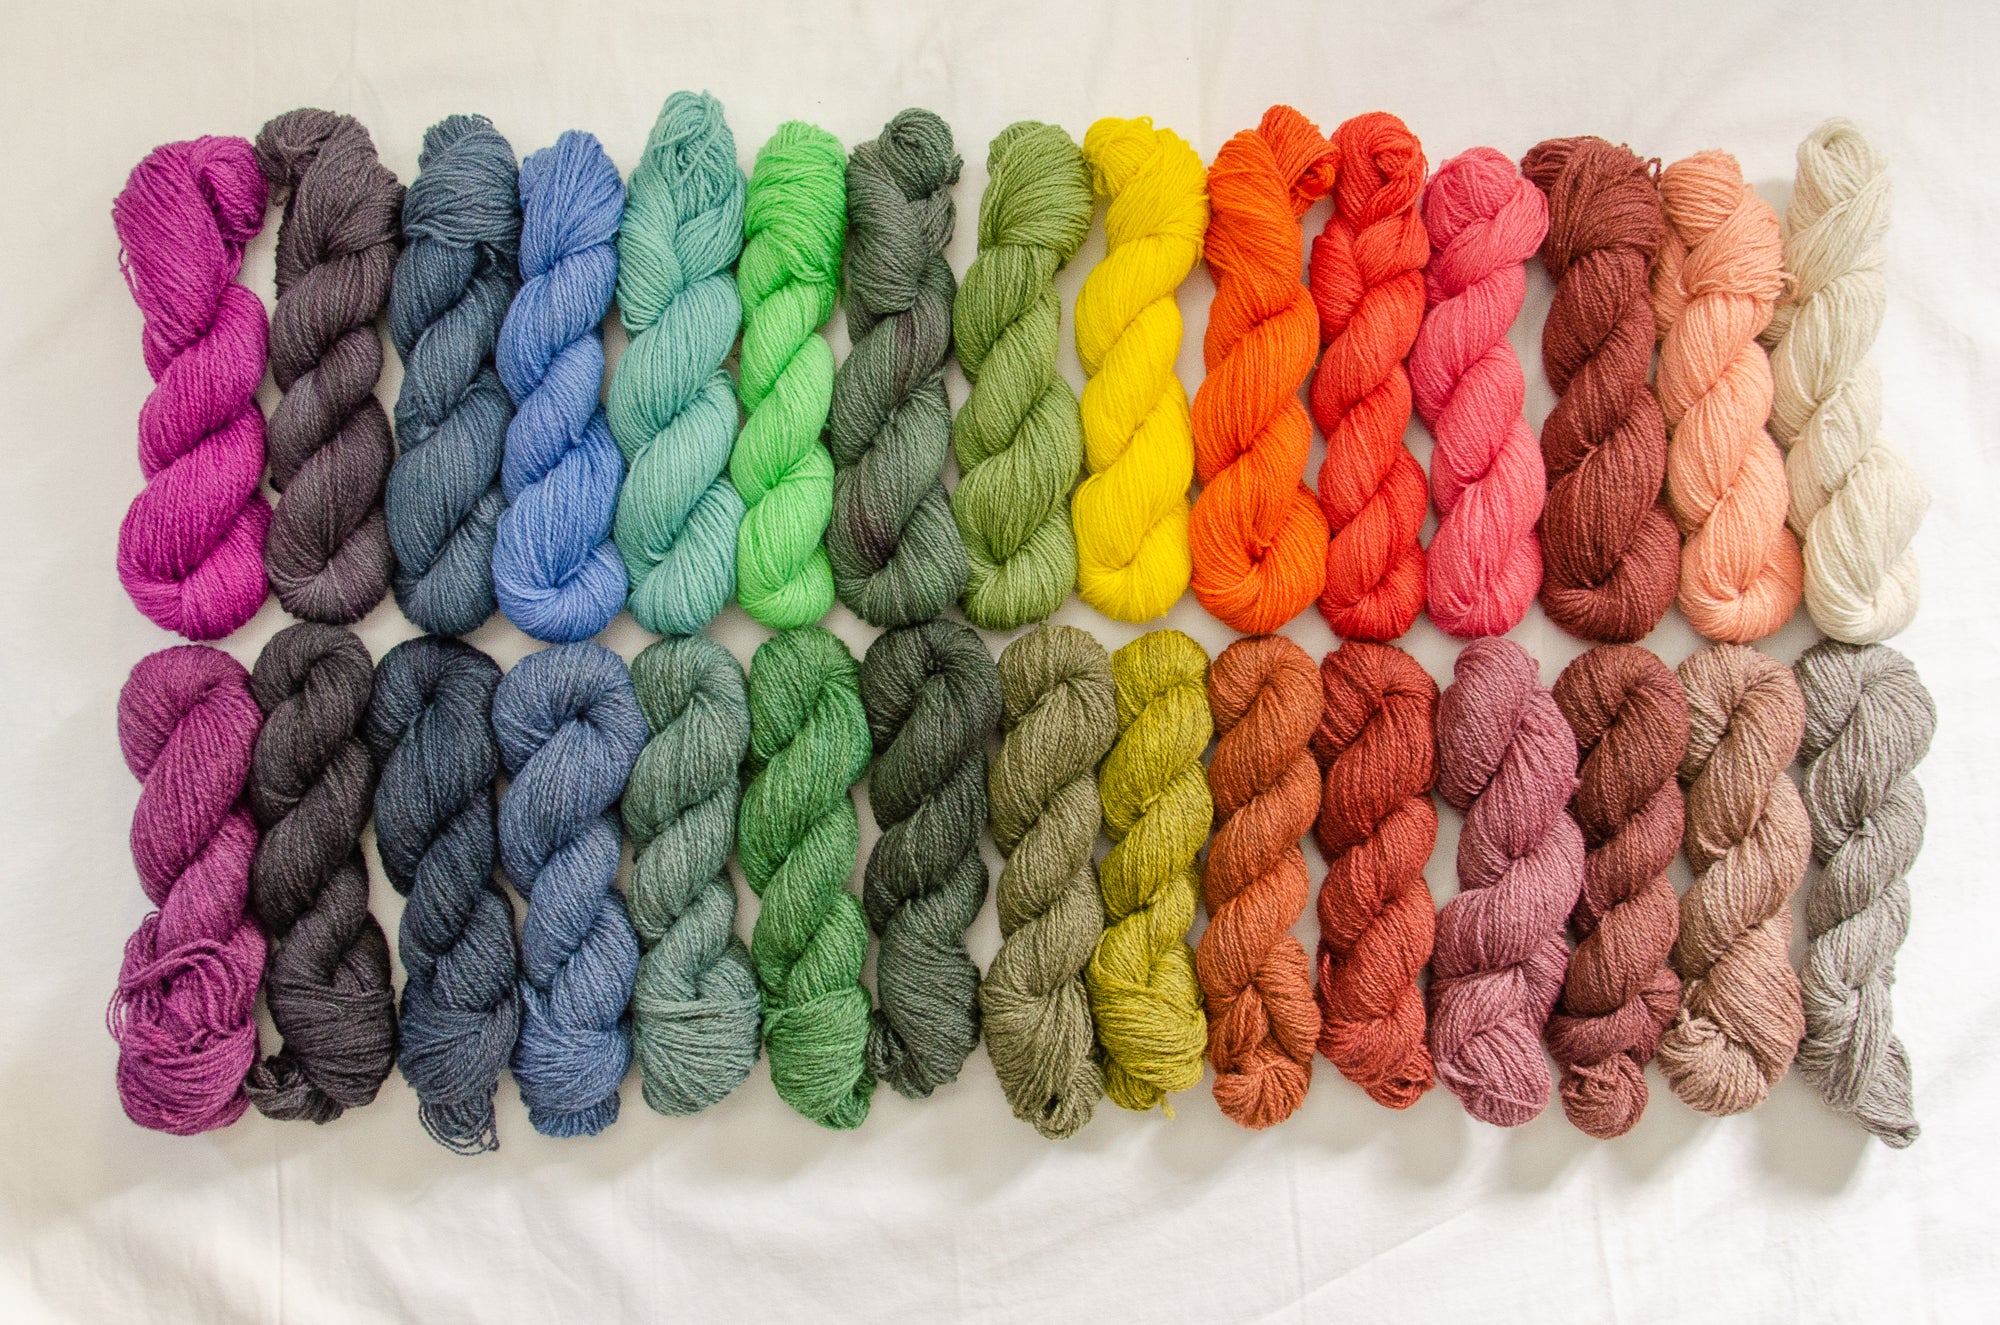 Mendip 4-Ply – Teal (Sunny)